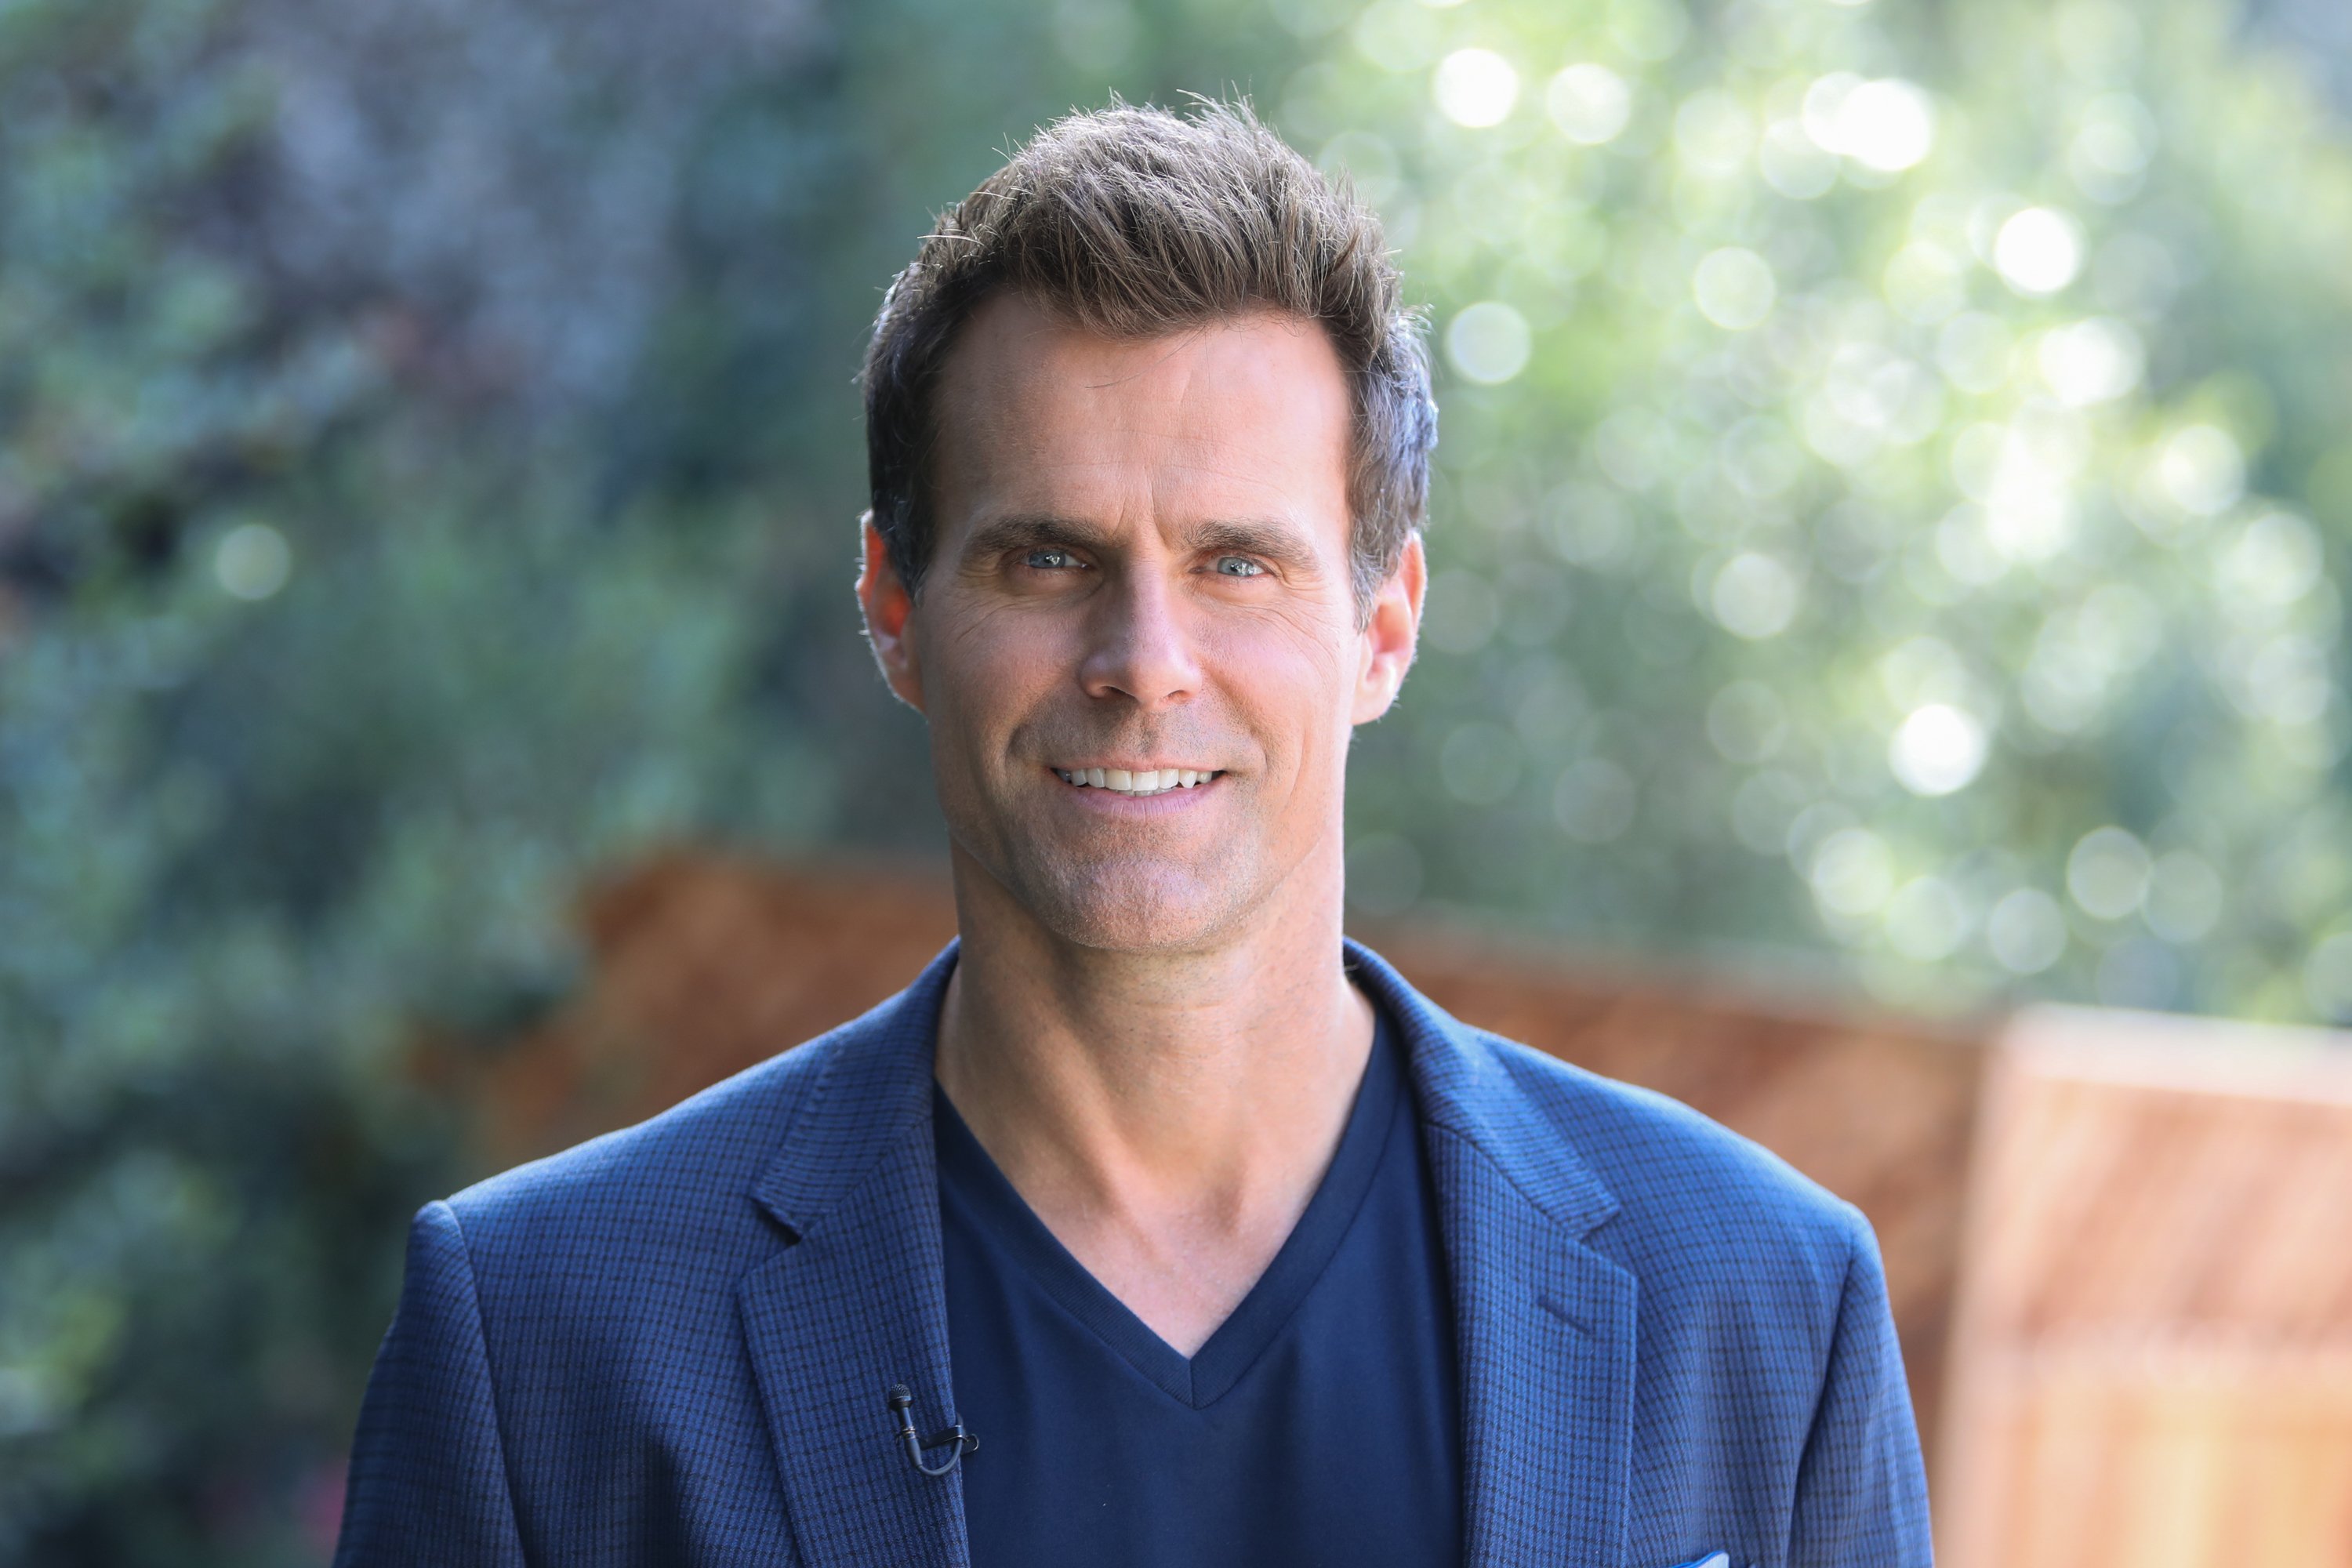 Cameron Mathison on the set of Hallmark's "Home & Family" at Universal Studios Hollywood on October 30, 2018  | Photo: GettyImages